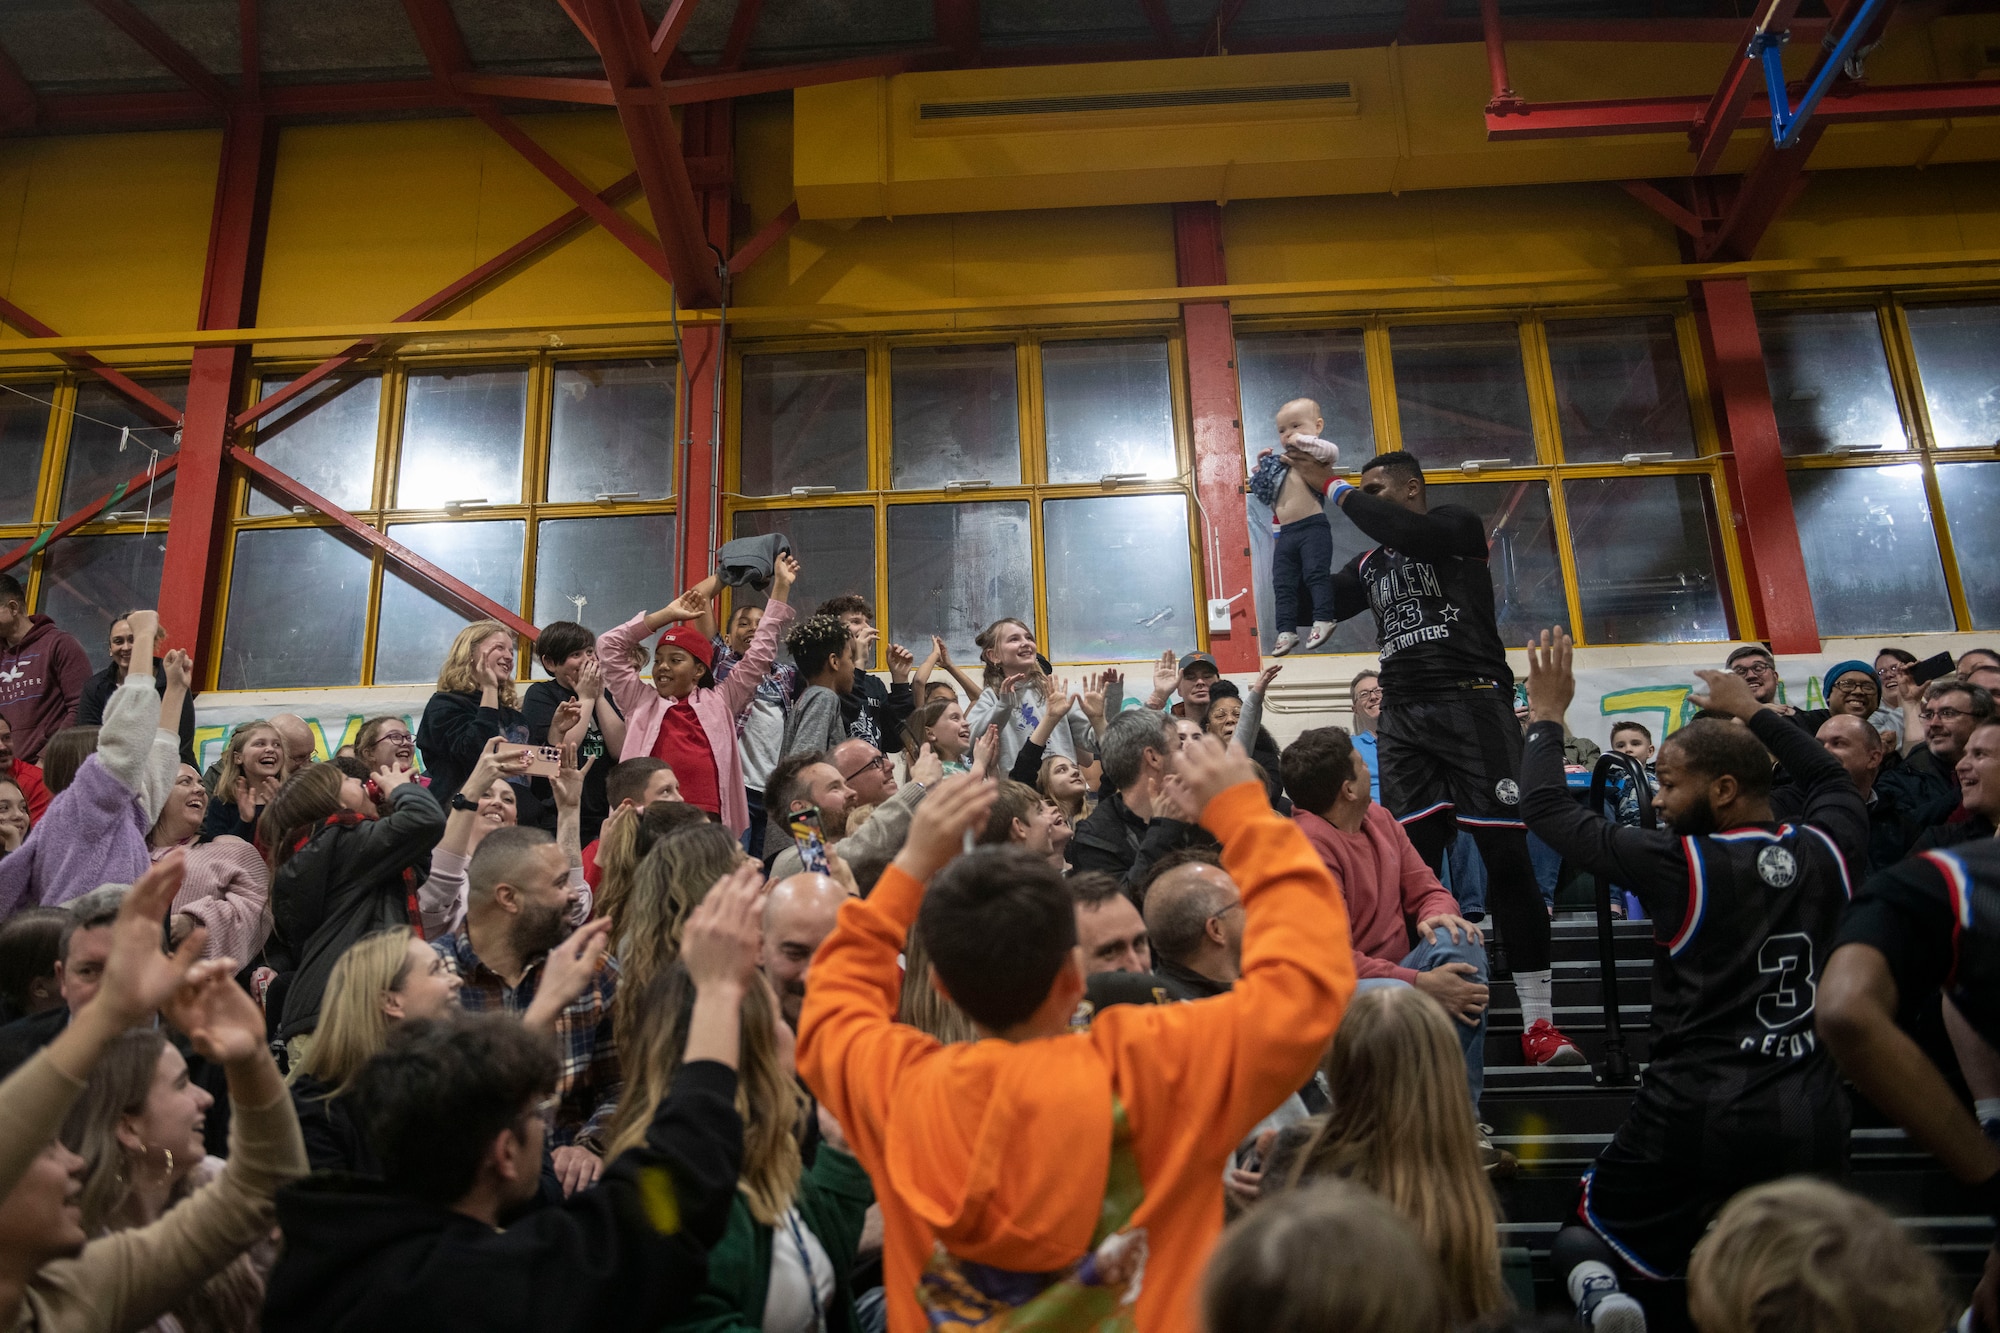 Corey “Thunder” Law, Harlem Globetrotters showman, raises a baby in the crowd at RAF Alconbury